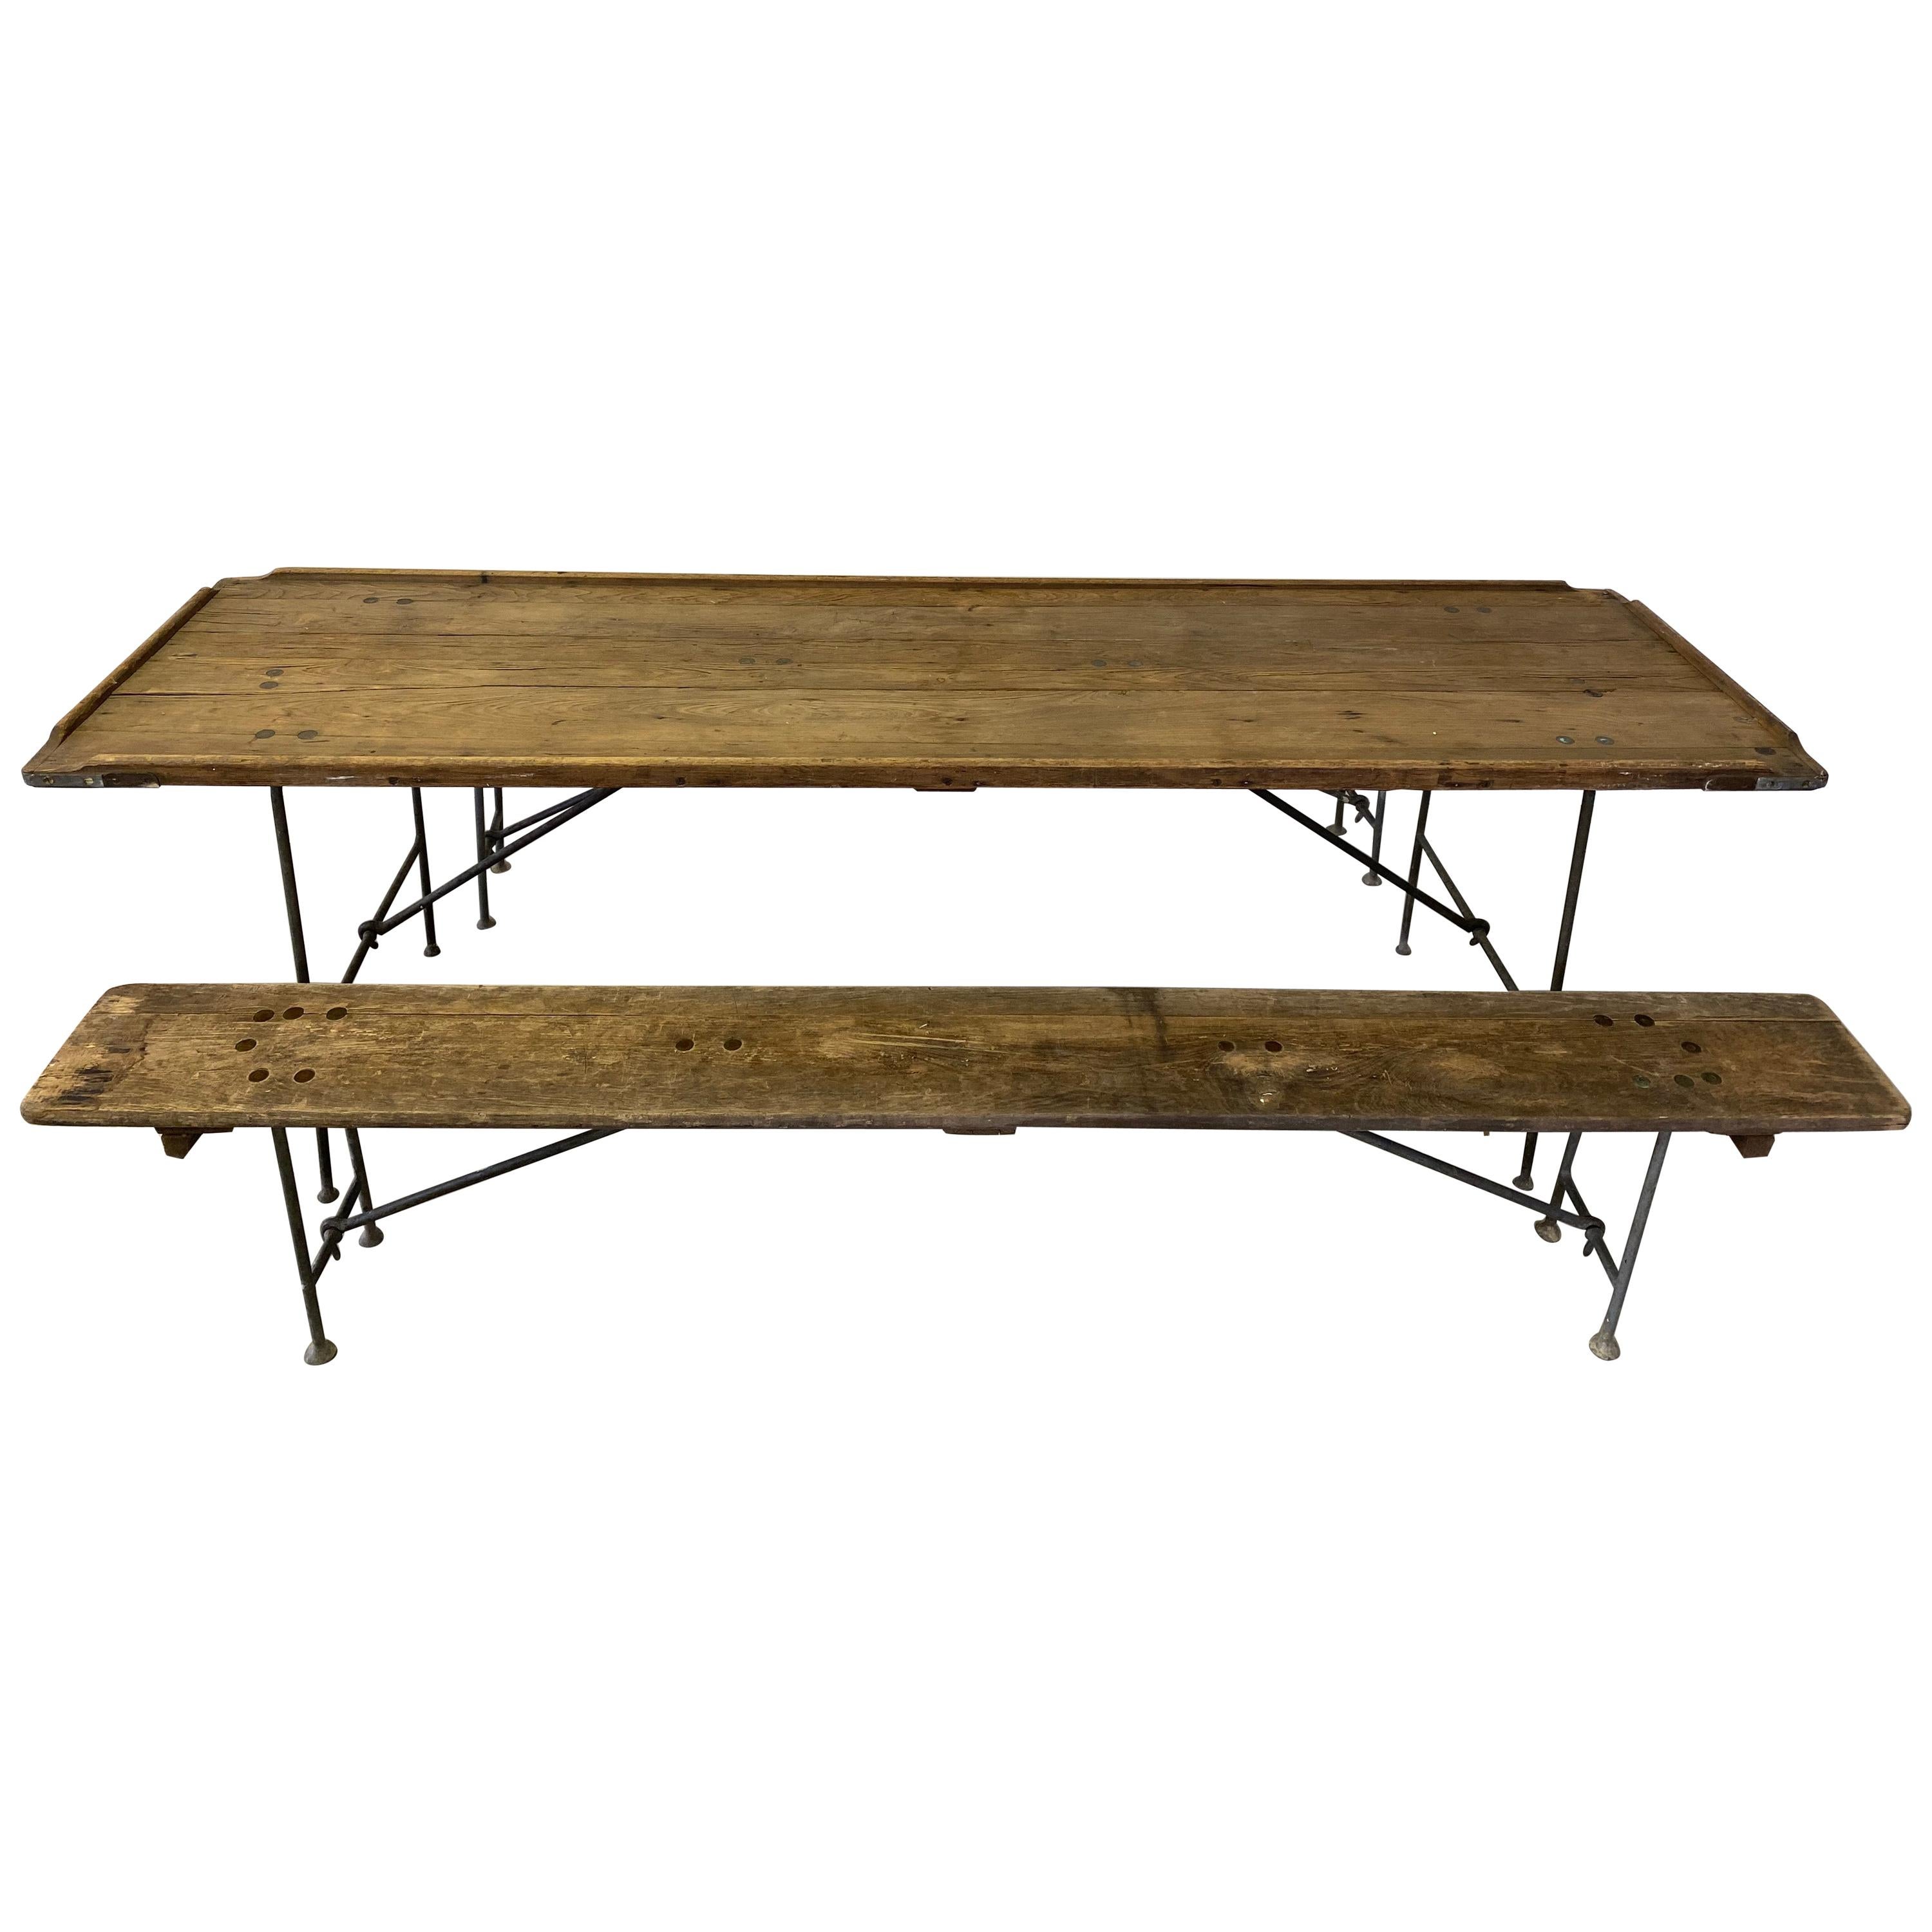 Naval Aircraft Carrier Folding Table and Benches